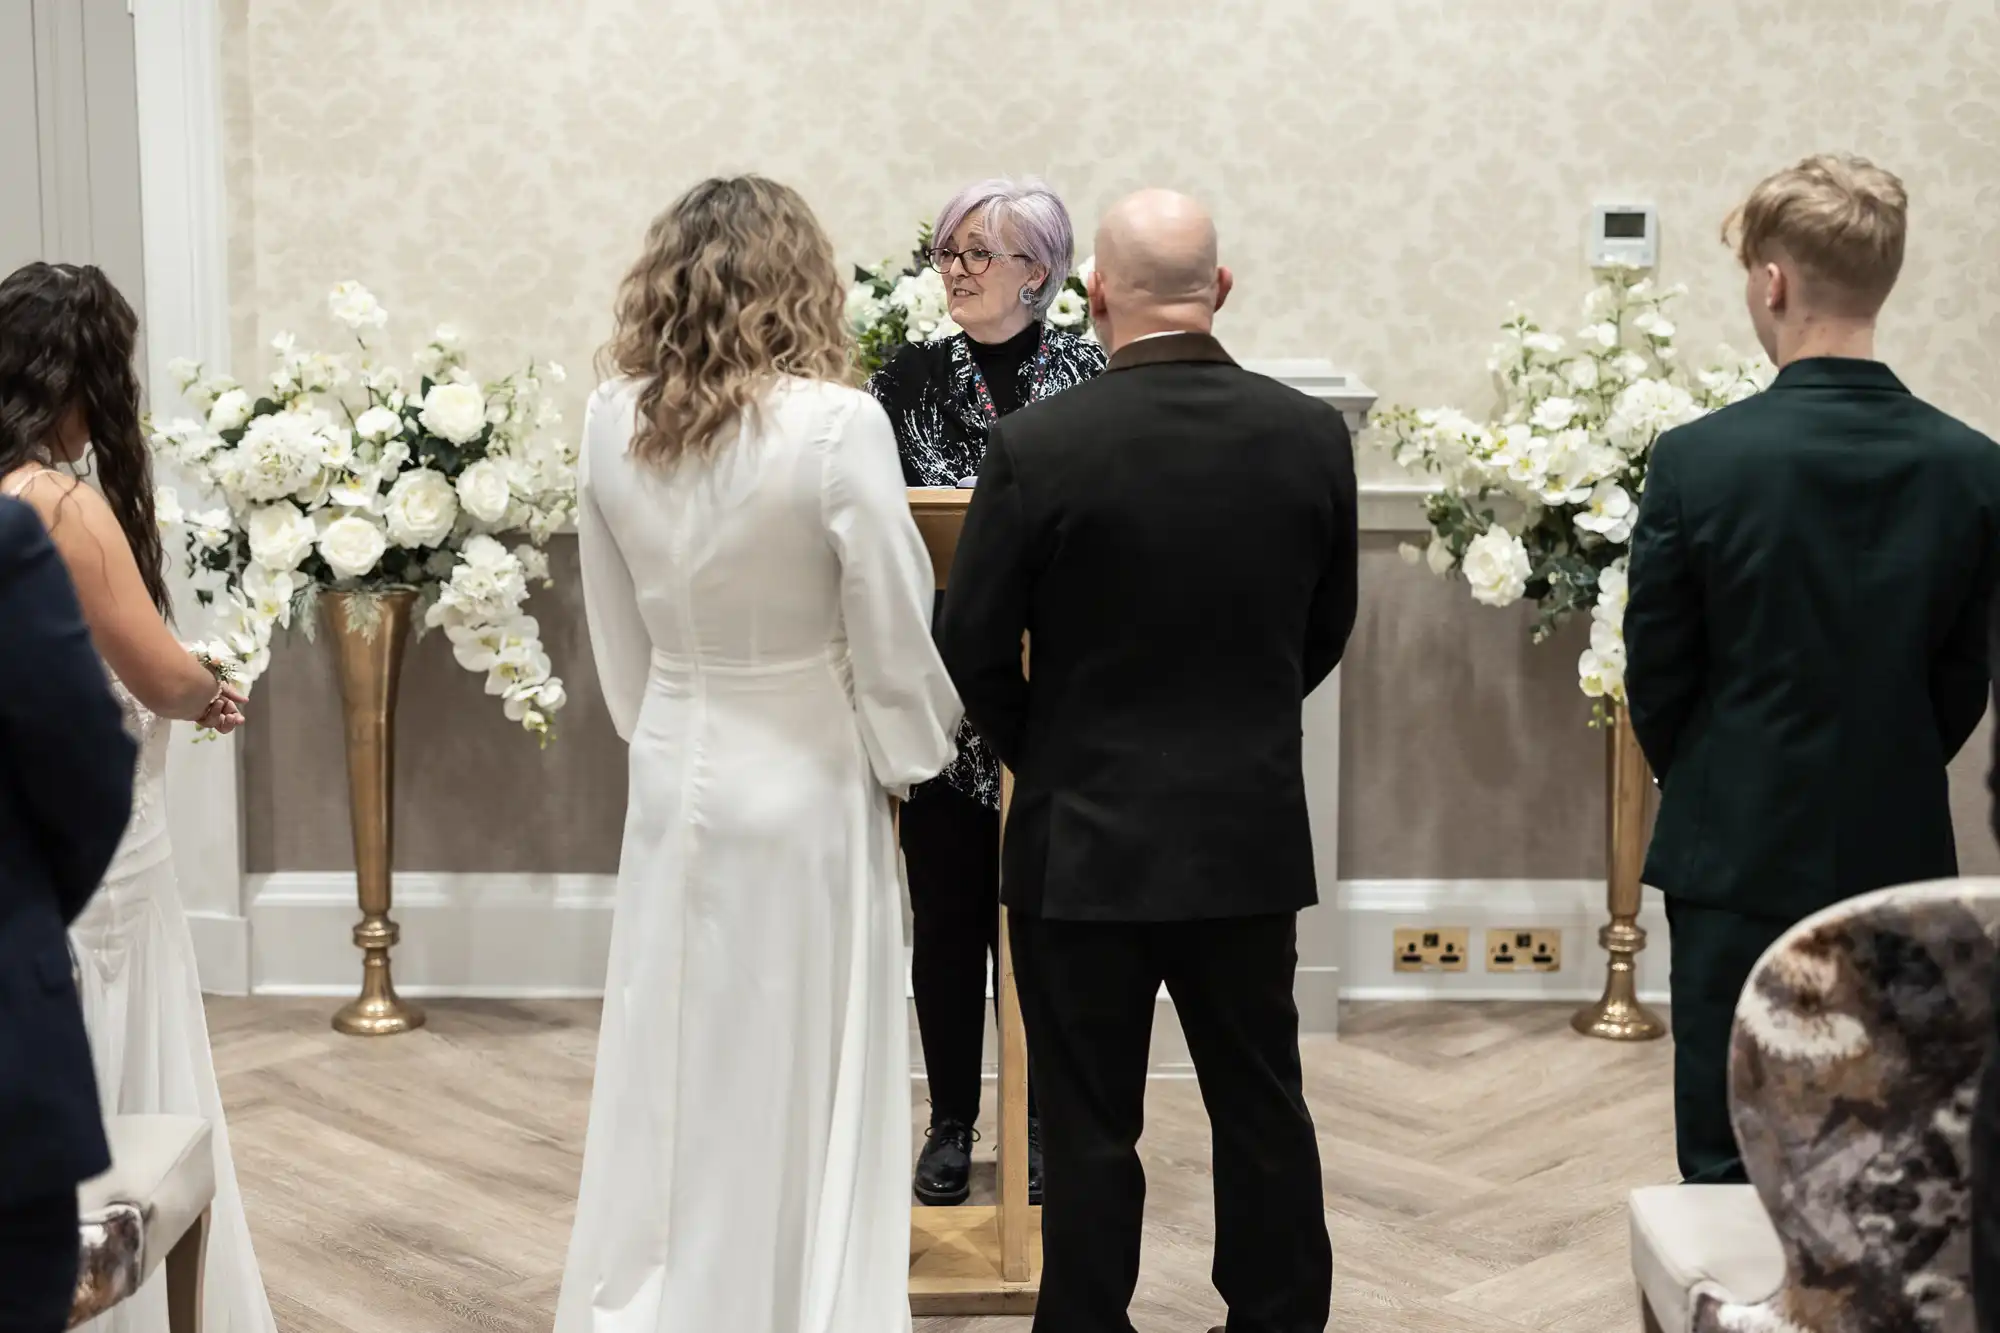 A wedding ceremony with an officiant speaking at a podium. A couple dressed in white and black stand facing the officiant, with two other individuals standing nearby. Flowers adorn the background.